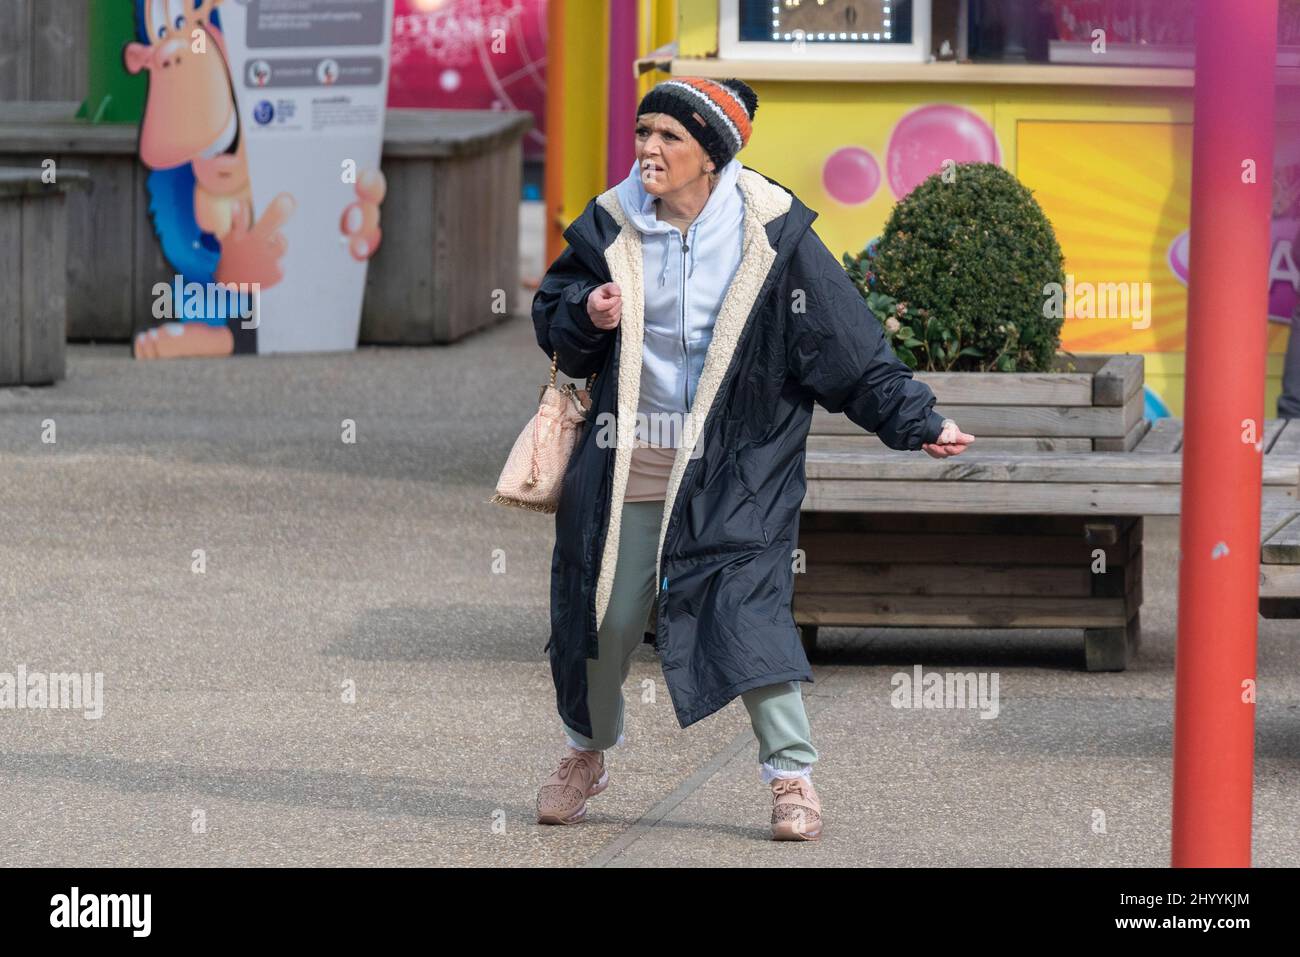 Southend on Sea, Essex, UK. 15th Mar, 2022. Filming for the BBC soap Eastenders has been taking place in the Adventure Island theme park on Southend’s seafront. The character Jean Slater, played by actor Gillian Wright, is seen running through the park seemingly in a panic. Rehearsal run through pictured in normal clothes. For the scene she wore a wedding dress. Bipolar storyline Stock Photo